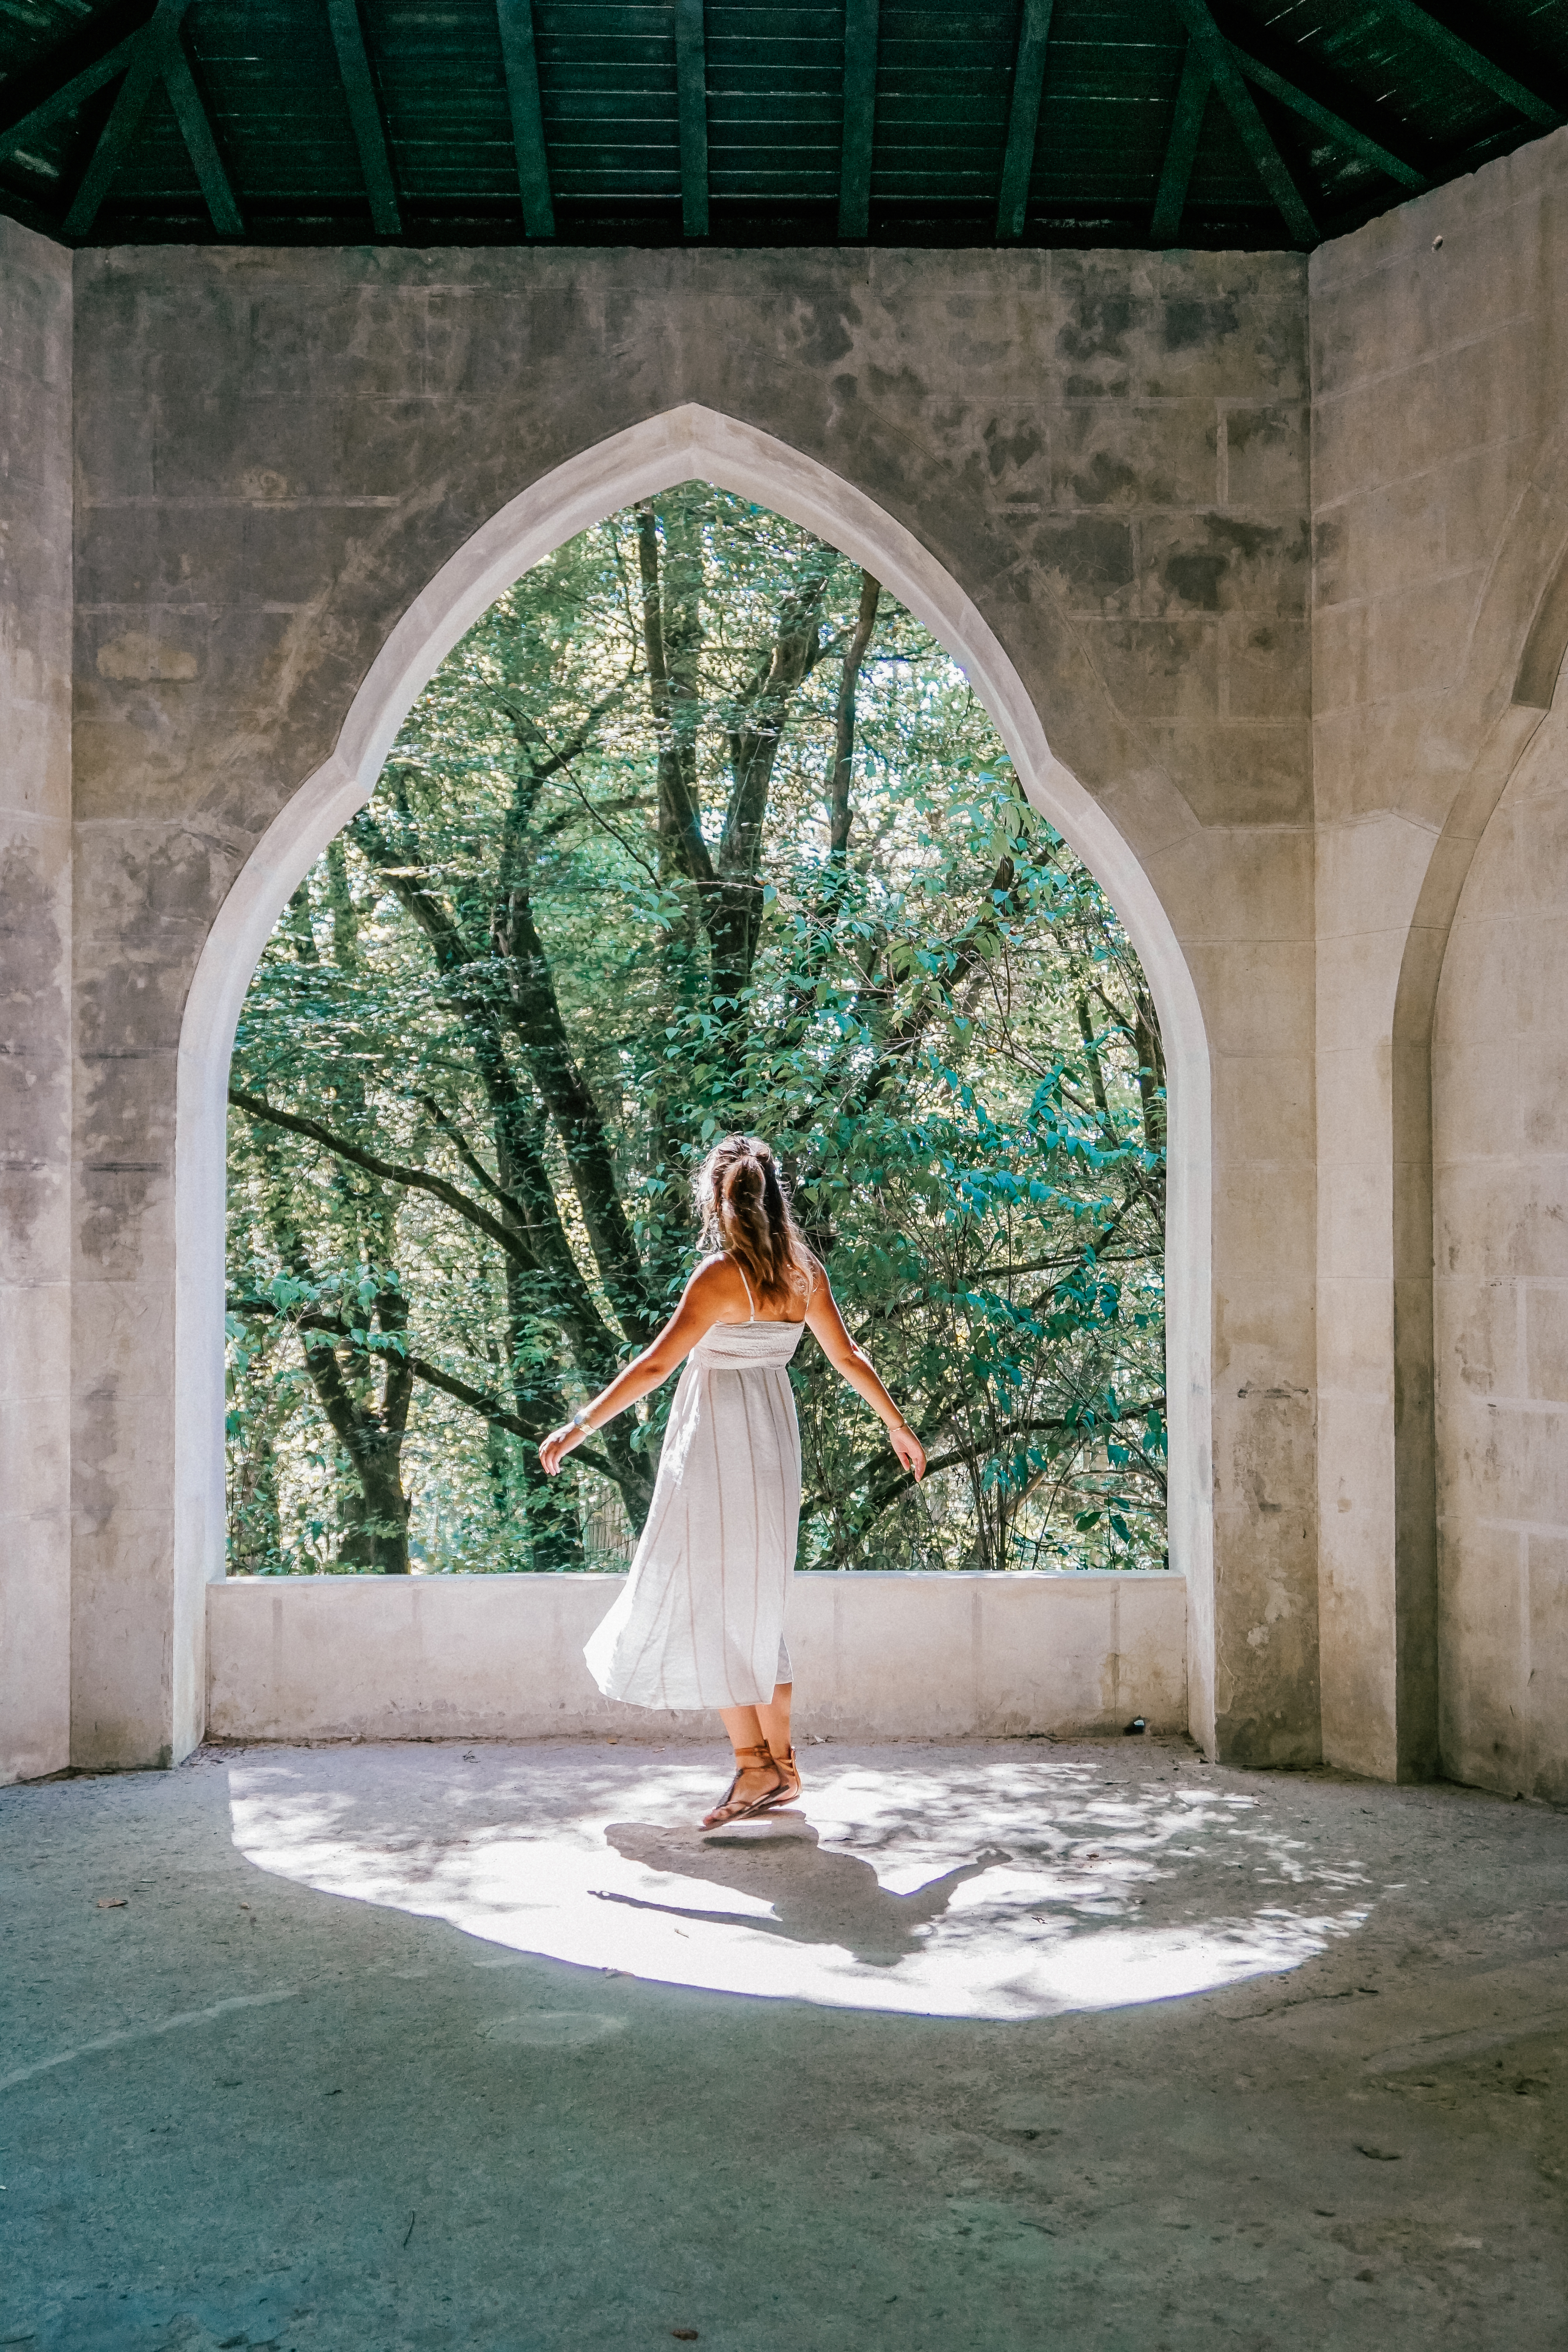 A girl in a white dress dances in the unique archway of sunlight in the Pena palace gardens. 